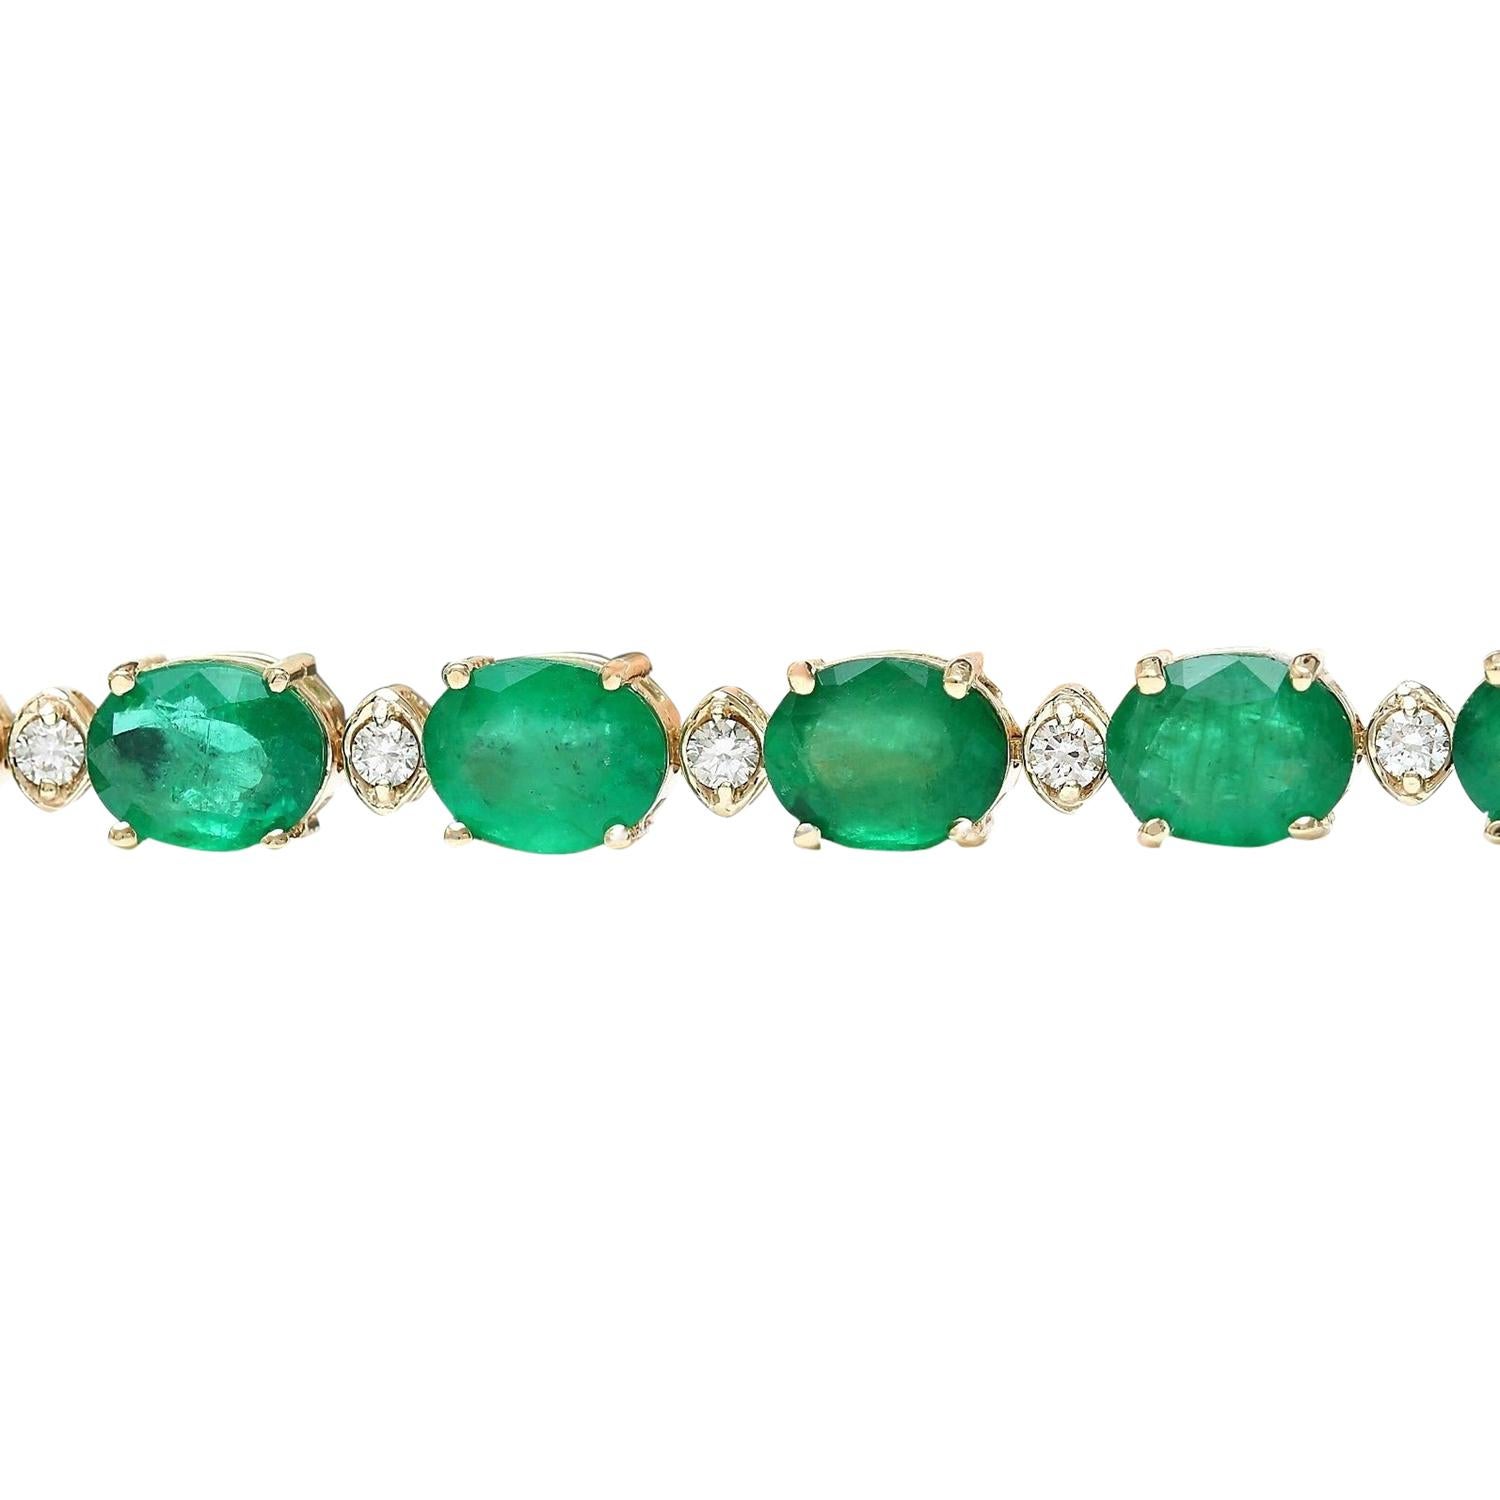 Modern Exquisite Natural Emerald Diamond Bracelet in 14K Solid Yellow Gold For Sale